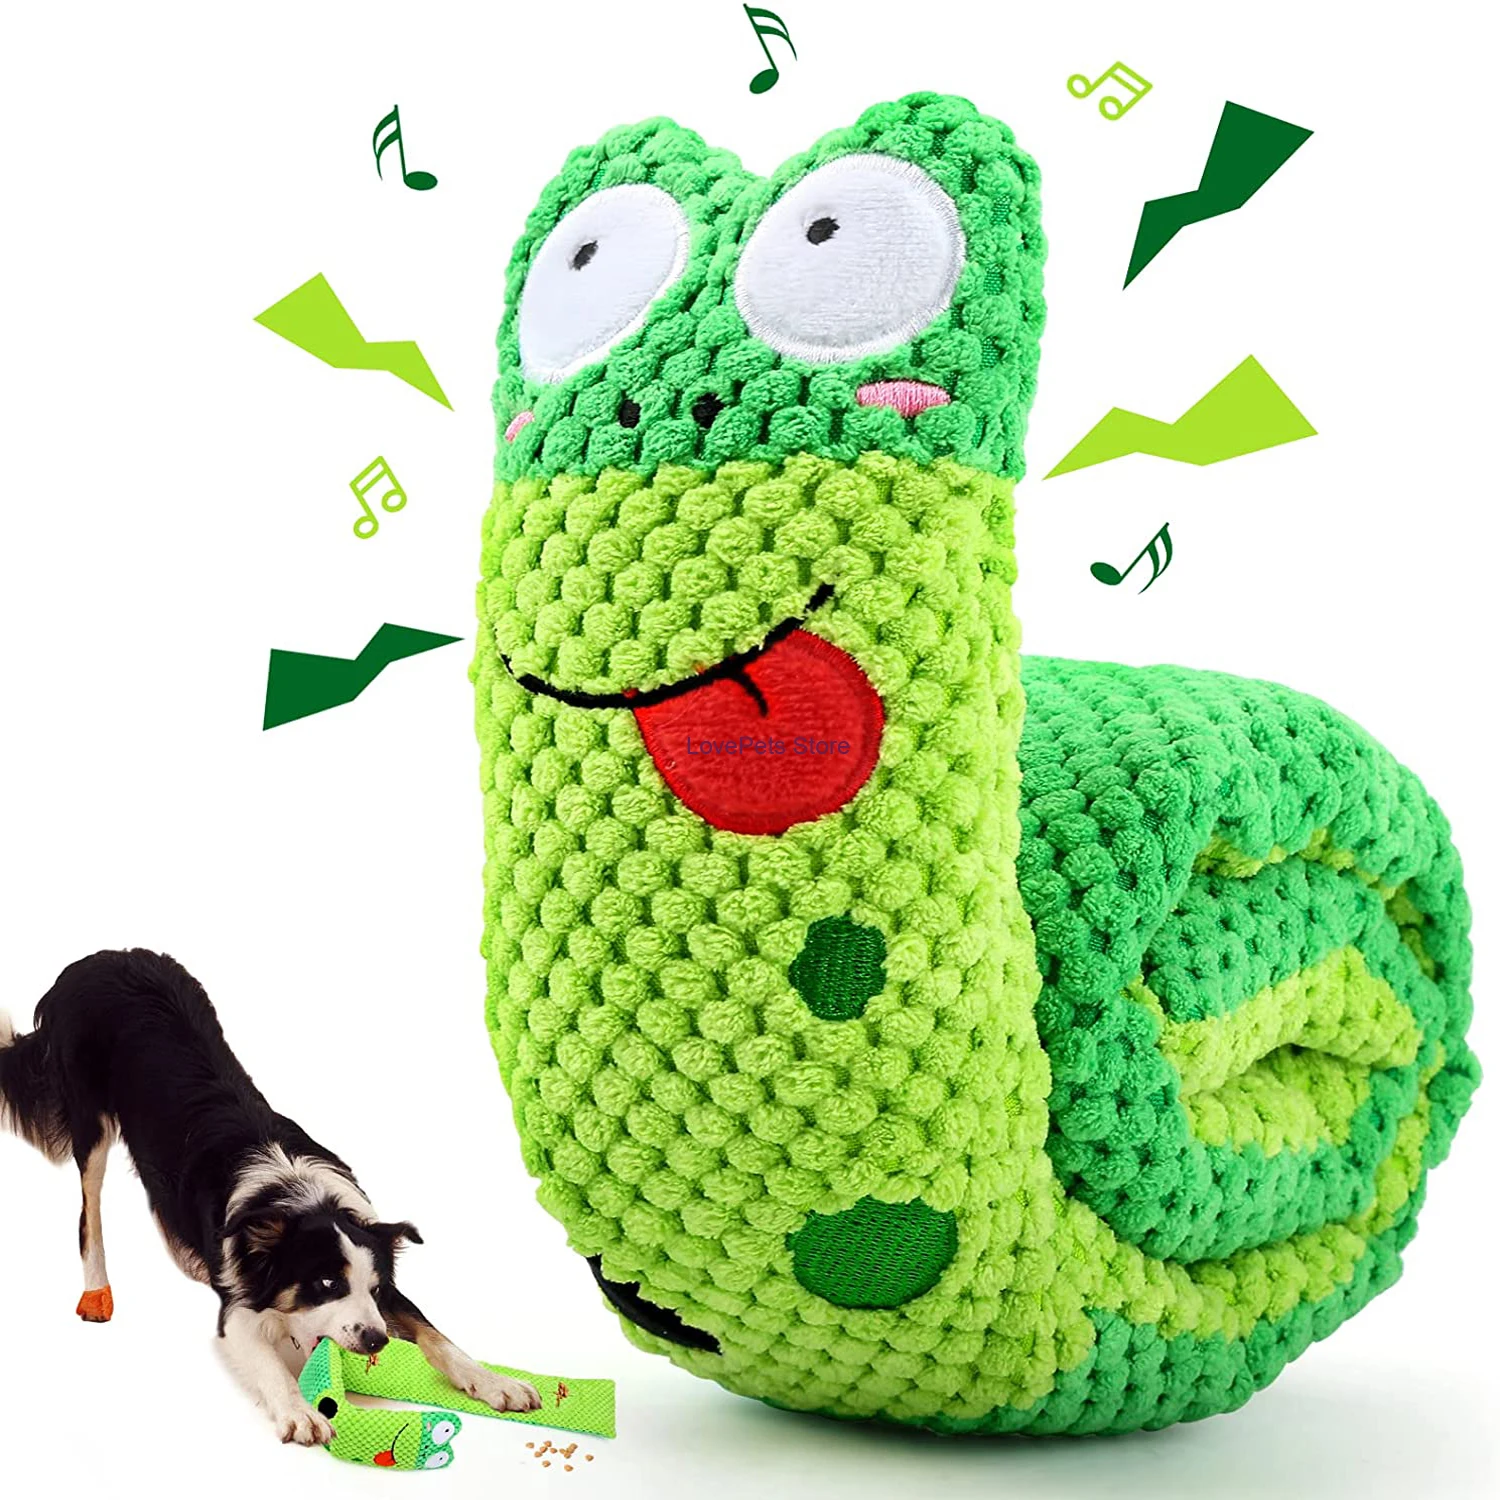 Pet Snuffle Mat for Dogs,Interactive Feed Puzzle for Boredom,Encourages  Natural Foraging Skills for Cats Rabbits Dogs Bowl, Dog Treat Dispenser  Indoor